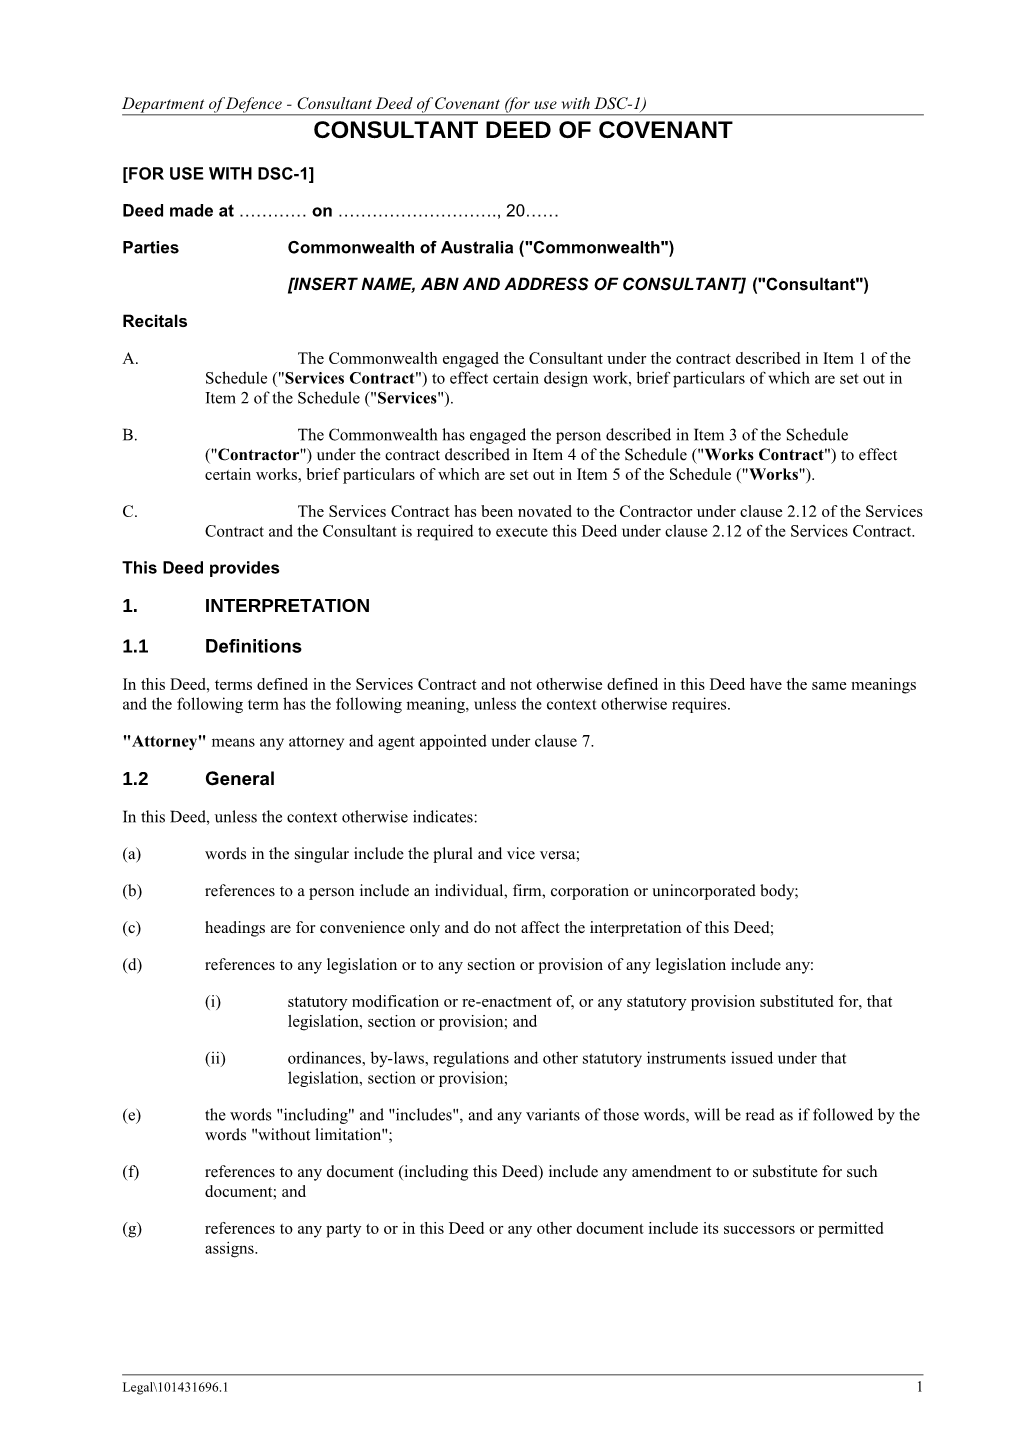 Department of Defence - Consultant Deed of Covenant (For Use with DSC-1)